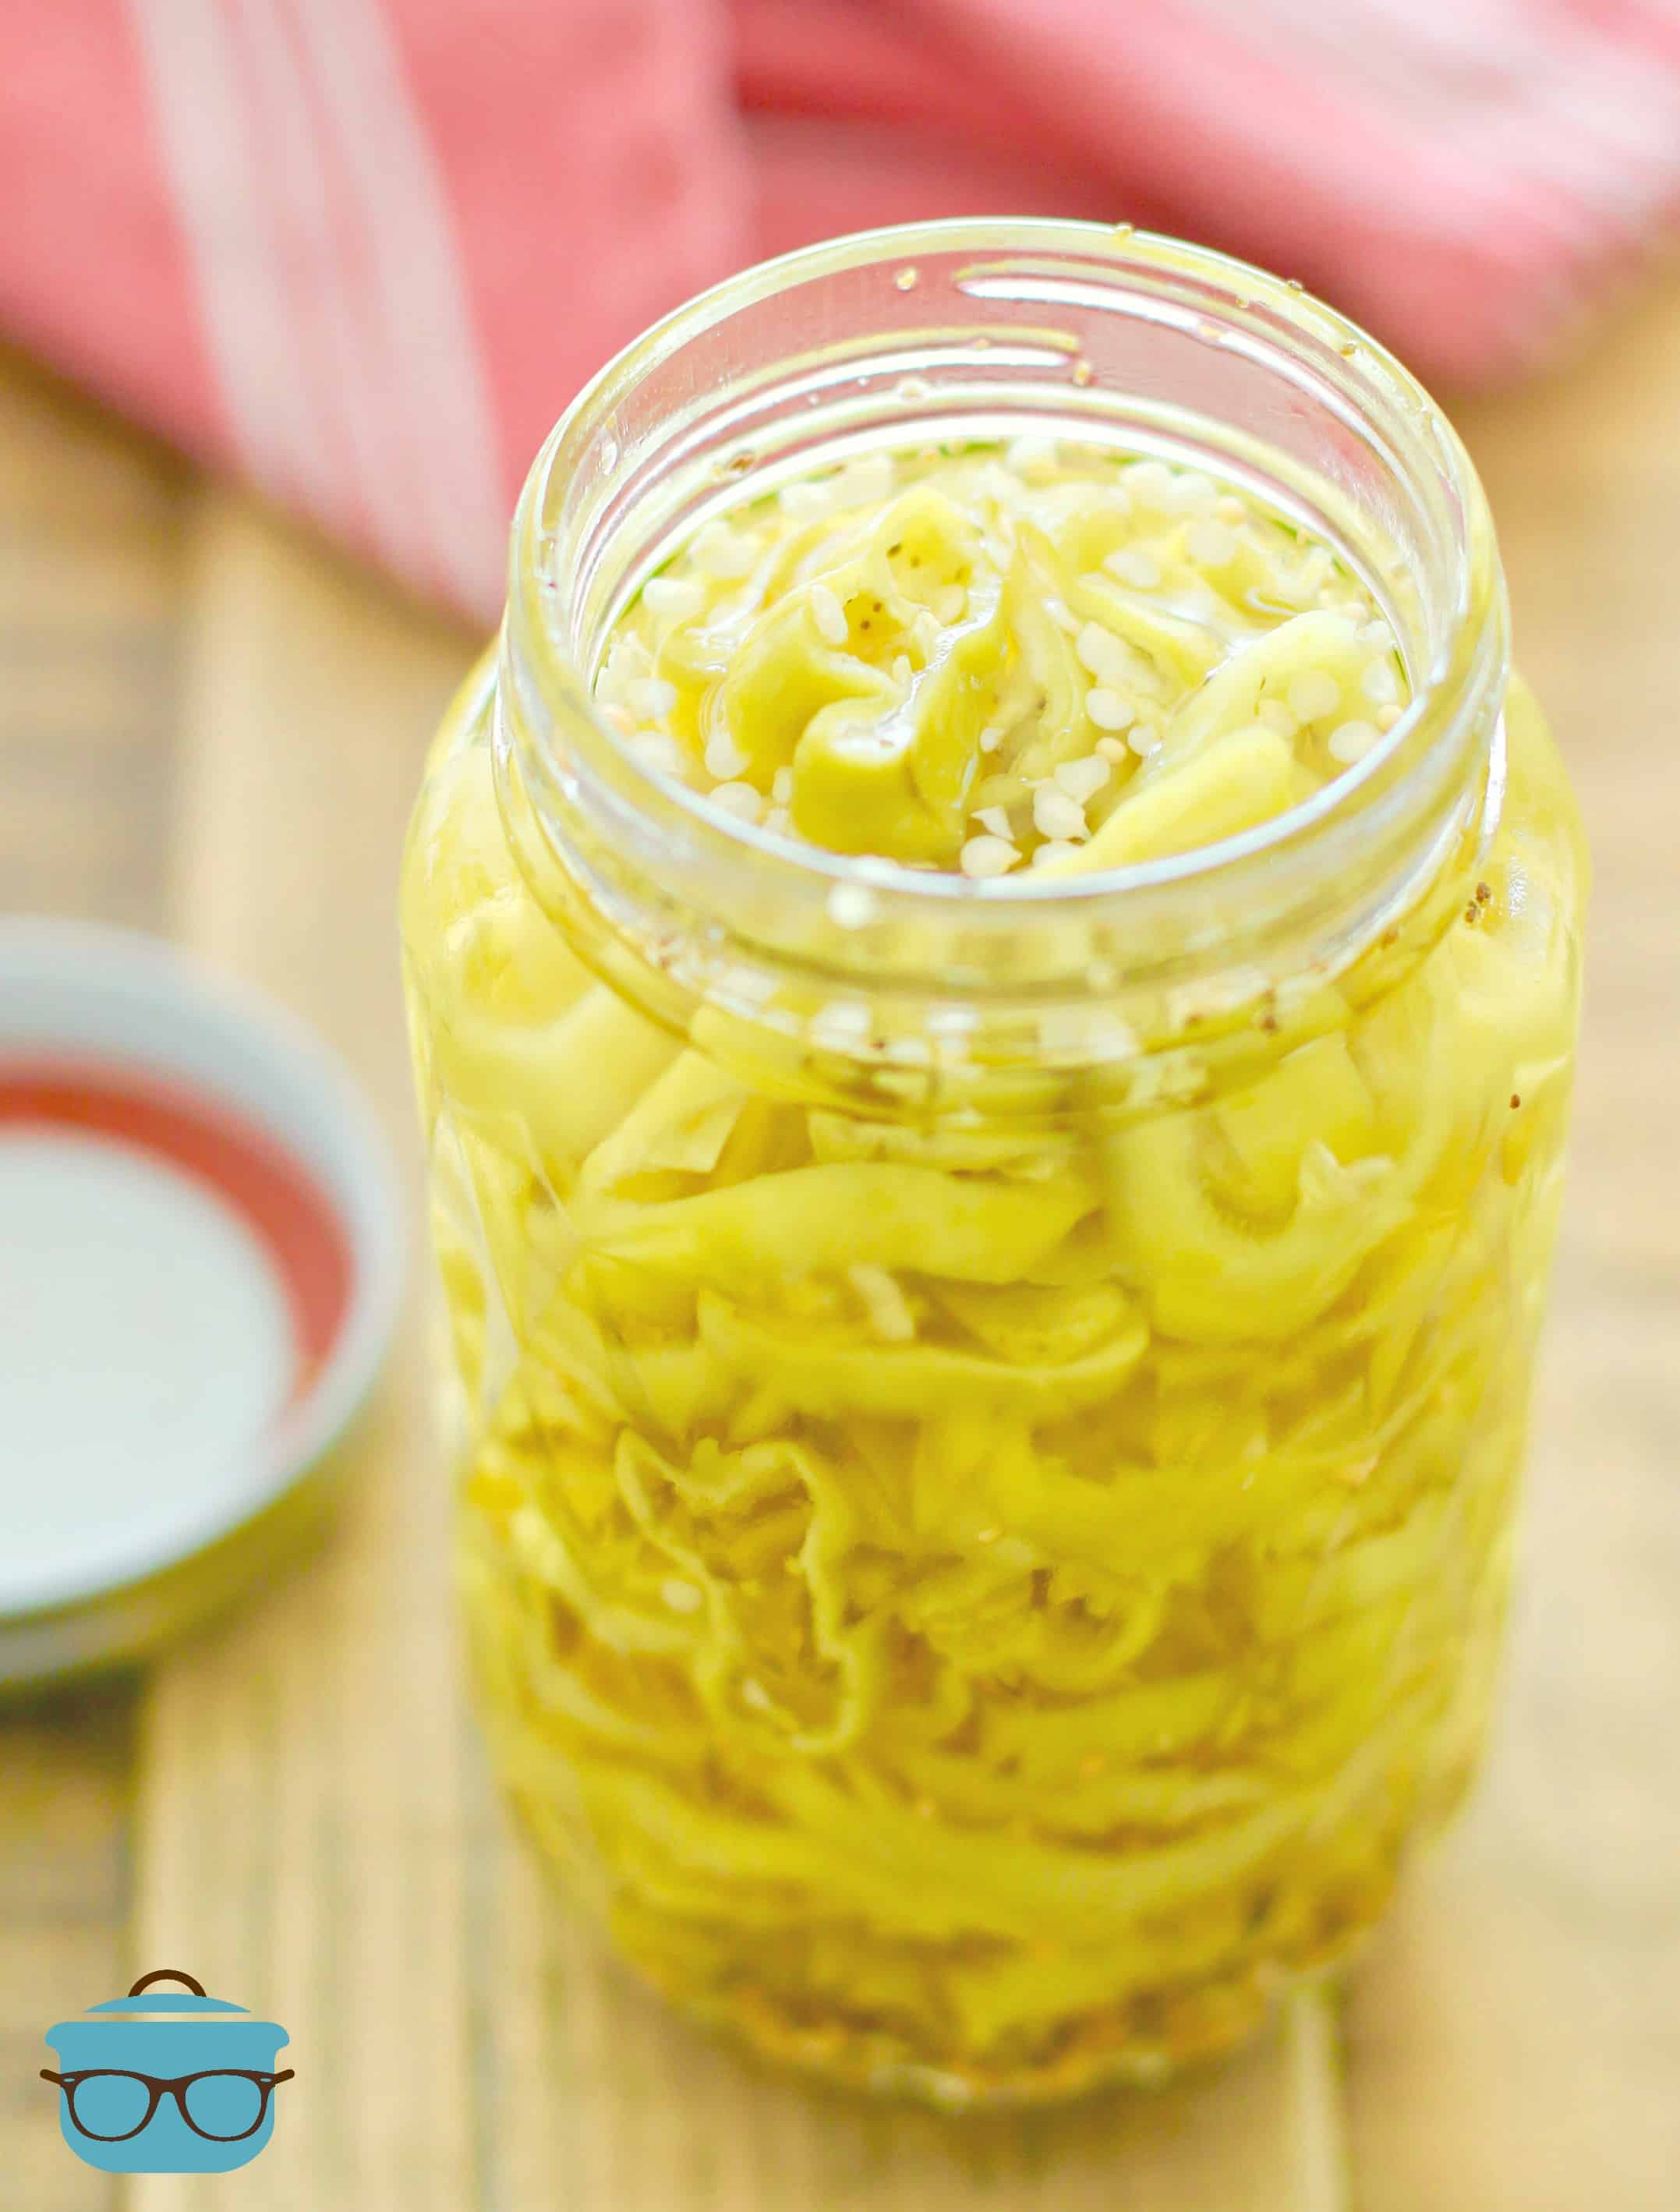 EASY PICKLED BANANA PEPPERS IN A PINT-SIZED CANNING JAR.